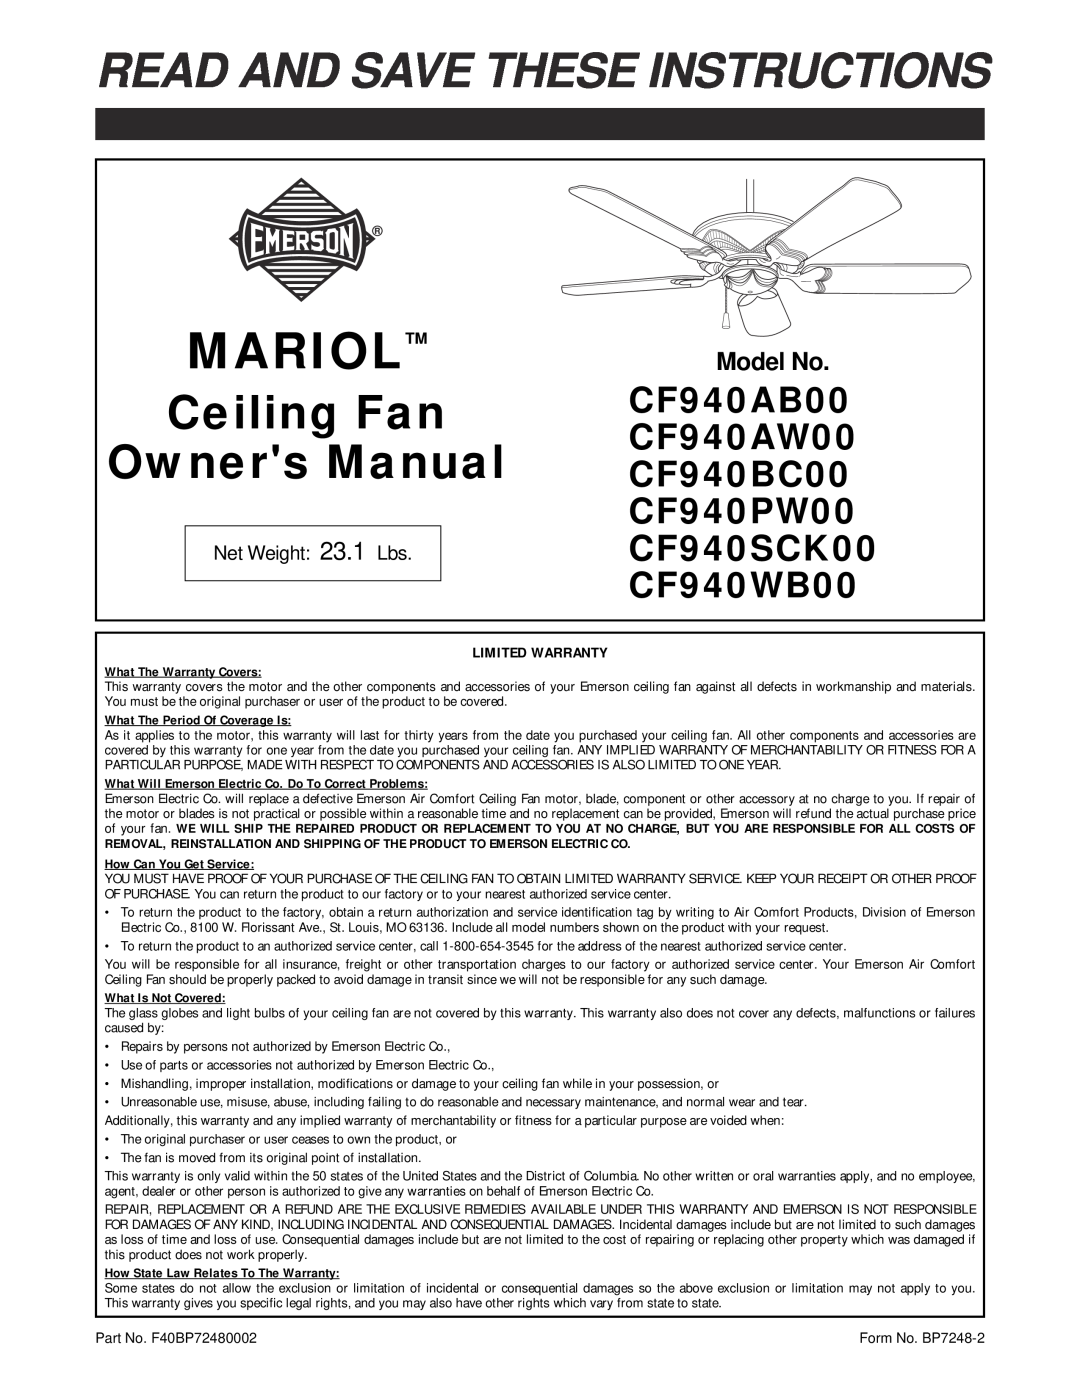 Emerson CF940BC00 warranty Model No, Mariol, Read And Save These Instructions, Ceiling Fan, CF940AB00, CF940AW00 